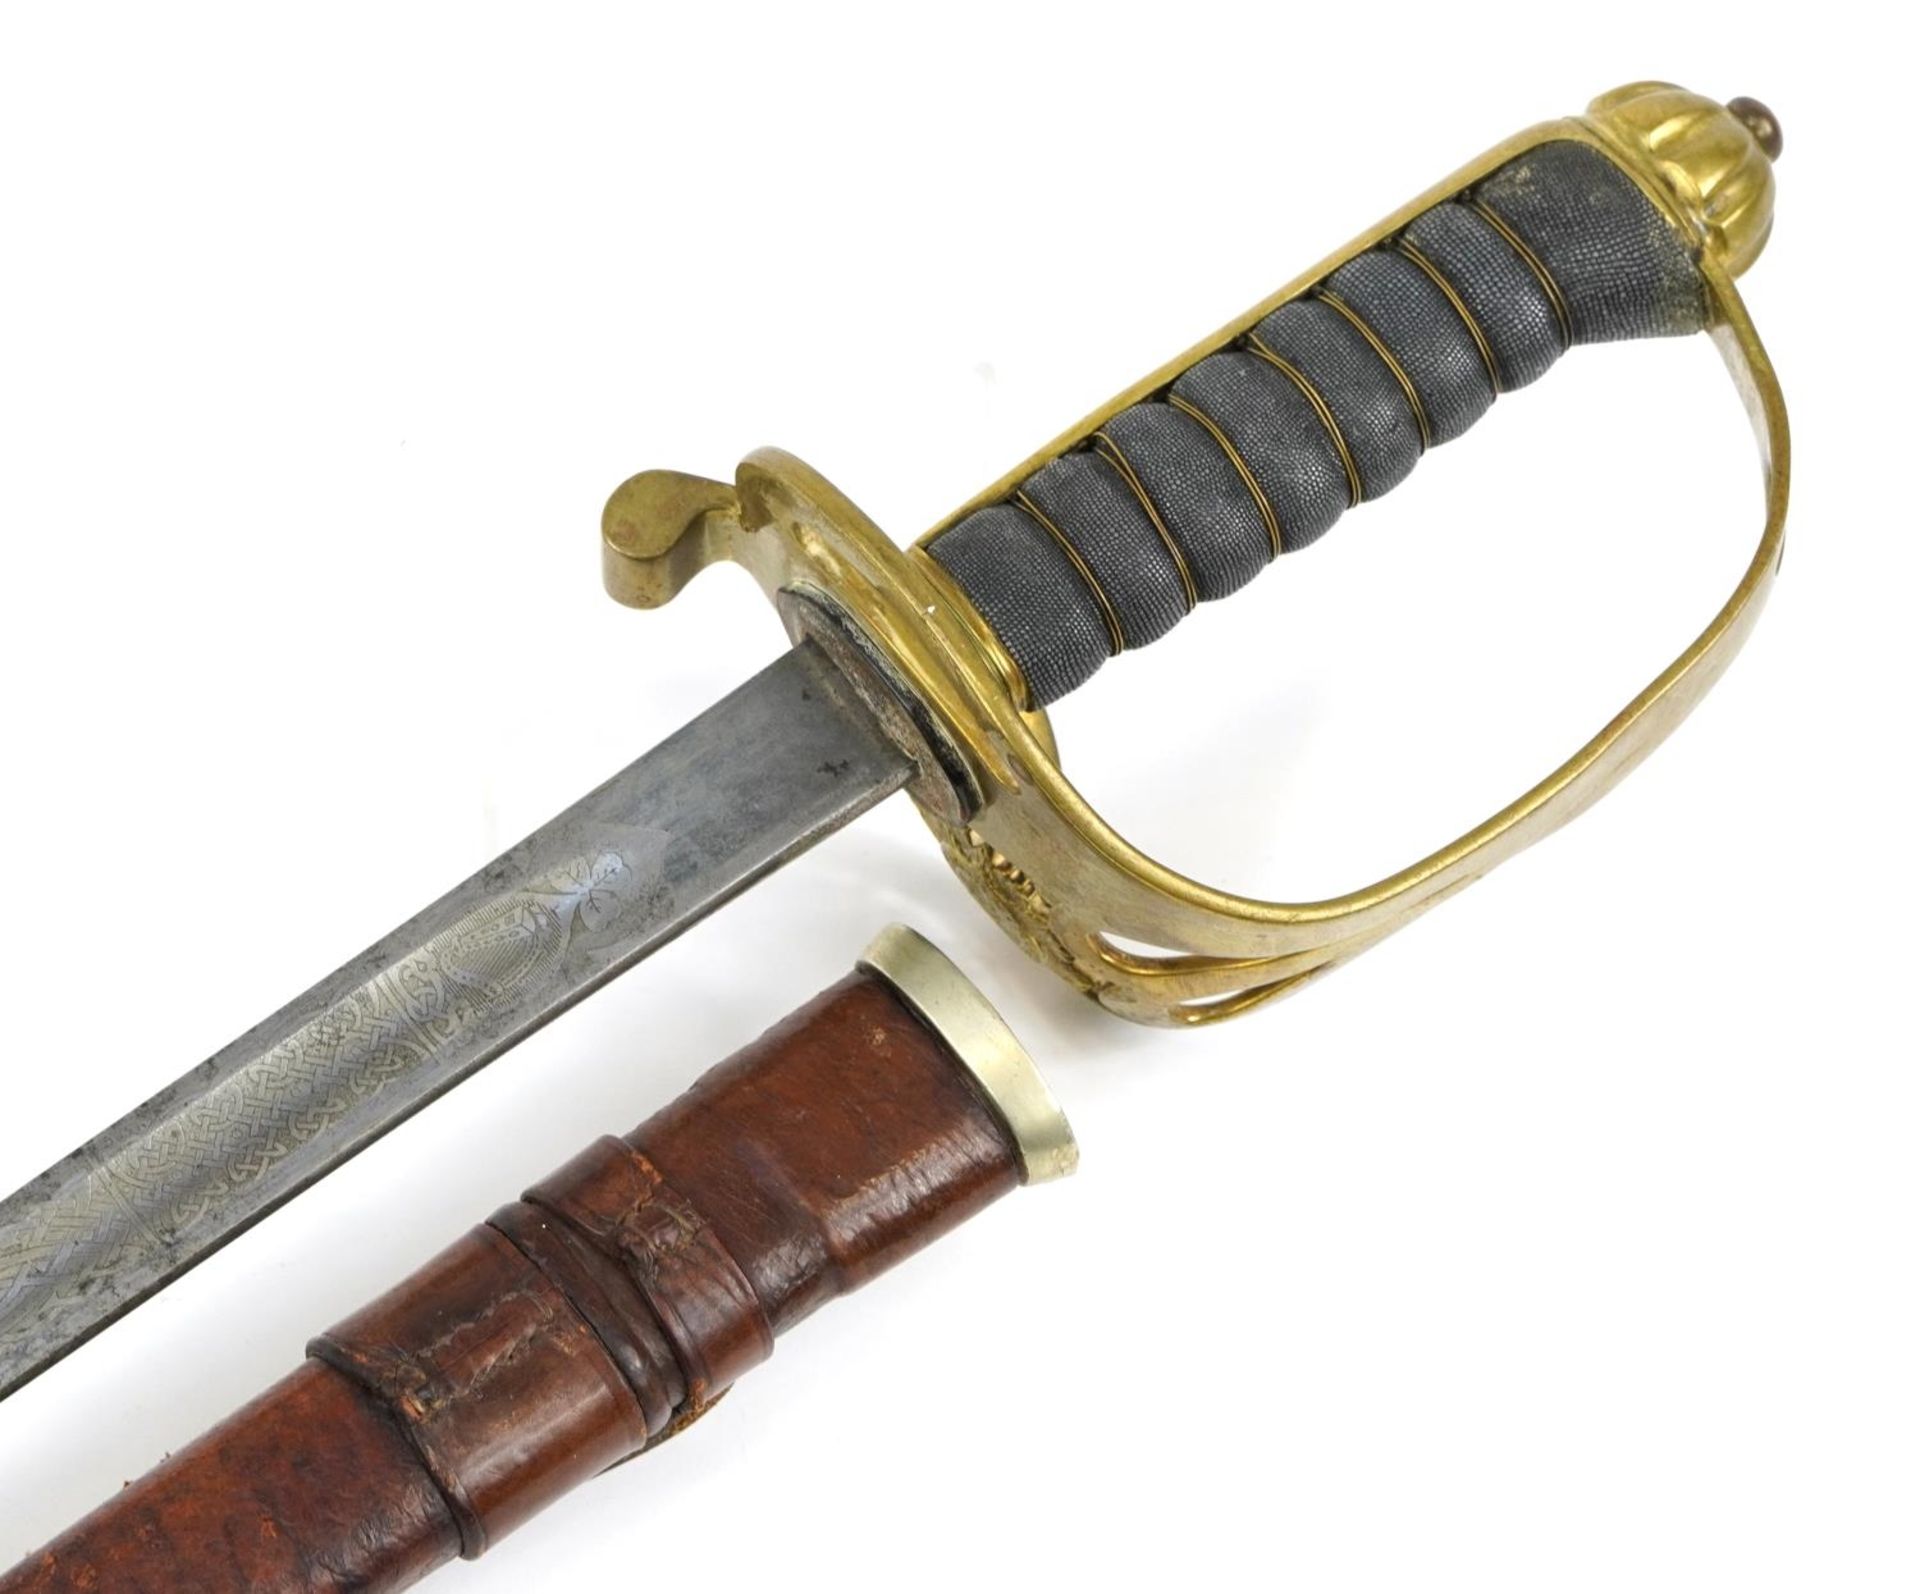 Victorian British military interest dress sword with steel blade engraved with Irish motifs, leather